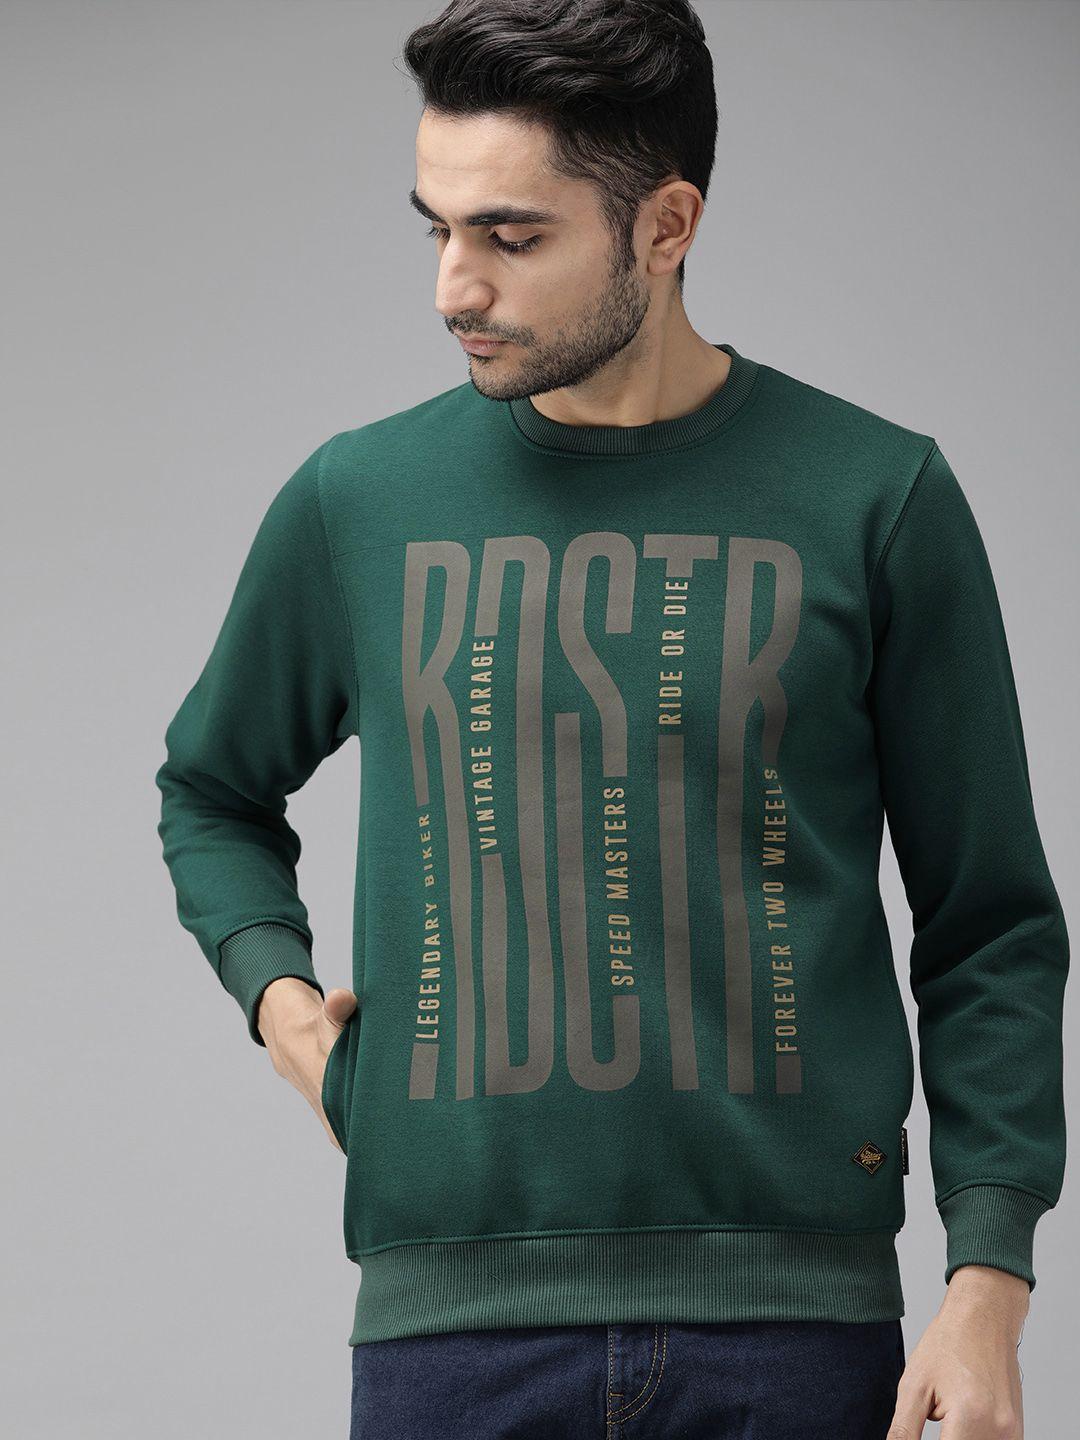 the roadster lifestyle co men green brand carrier printed sweatshirt with pockets